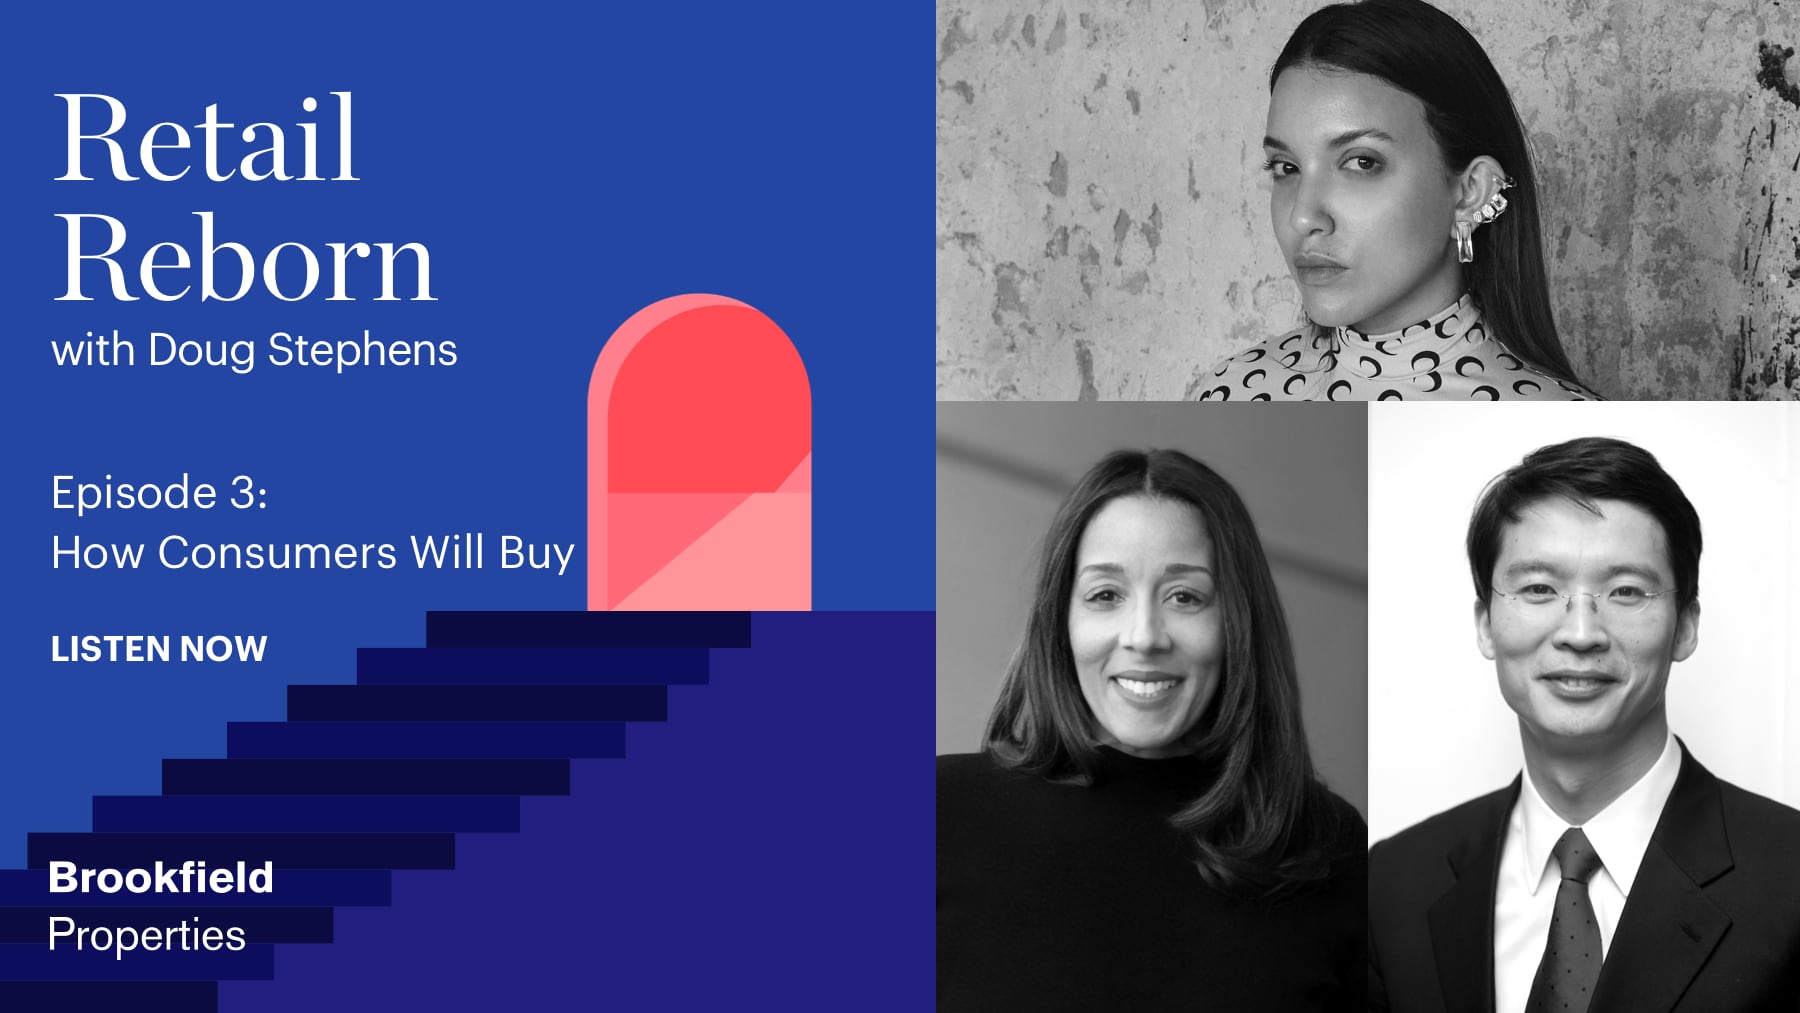 Retail Reborn Season 2, Episode 3: How Consumers Will Shop. Guests starting from the top: design and blockchain expert Marjorie Hernandez de Vogelsteller; fashion tech lawyer Gina Bibby; adjunct professor in global digital economy Winston Ma.